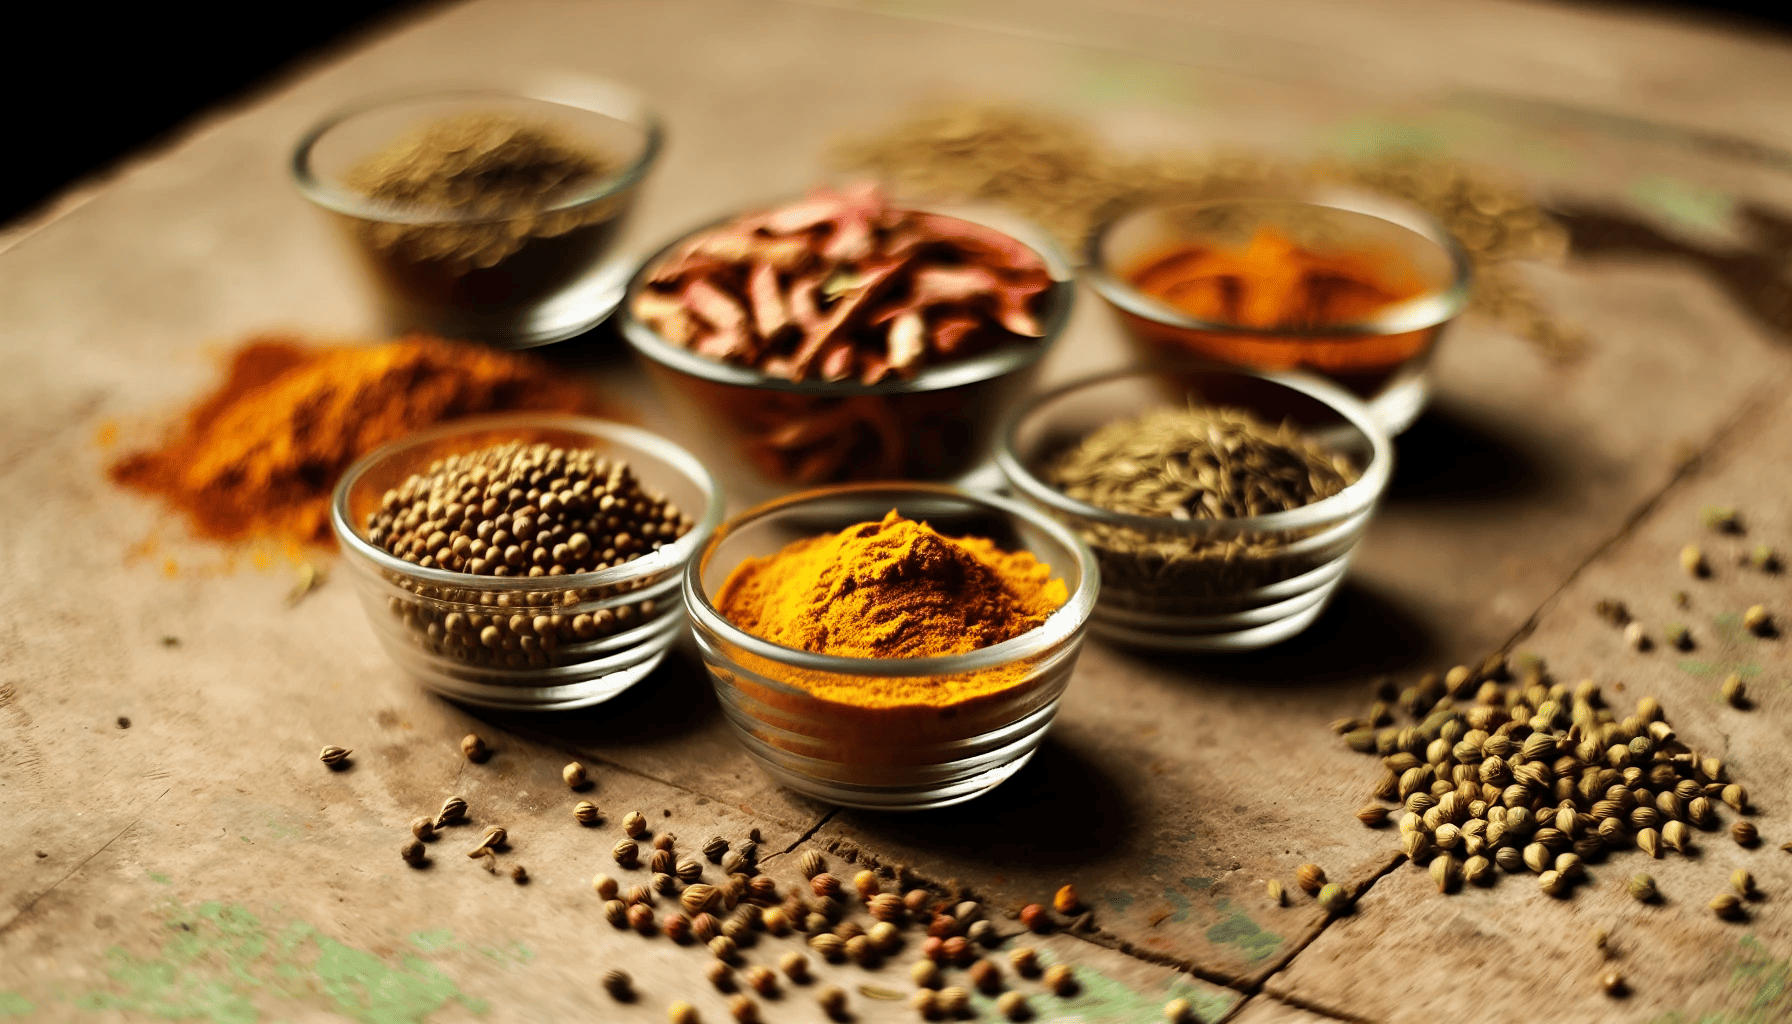 A selection of various colorful Indian spices in bowls